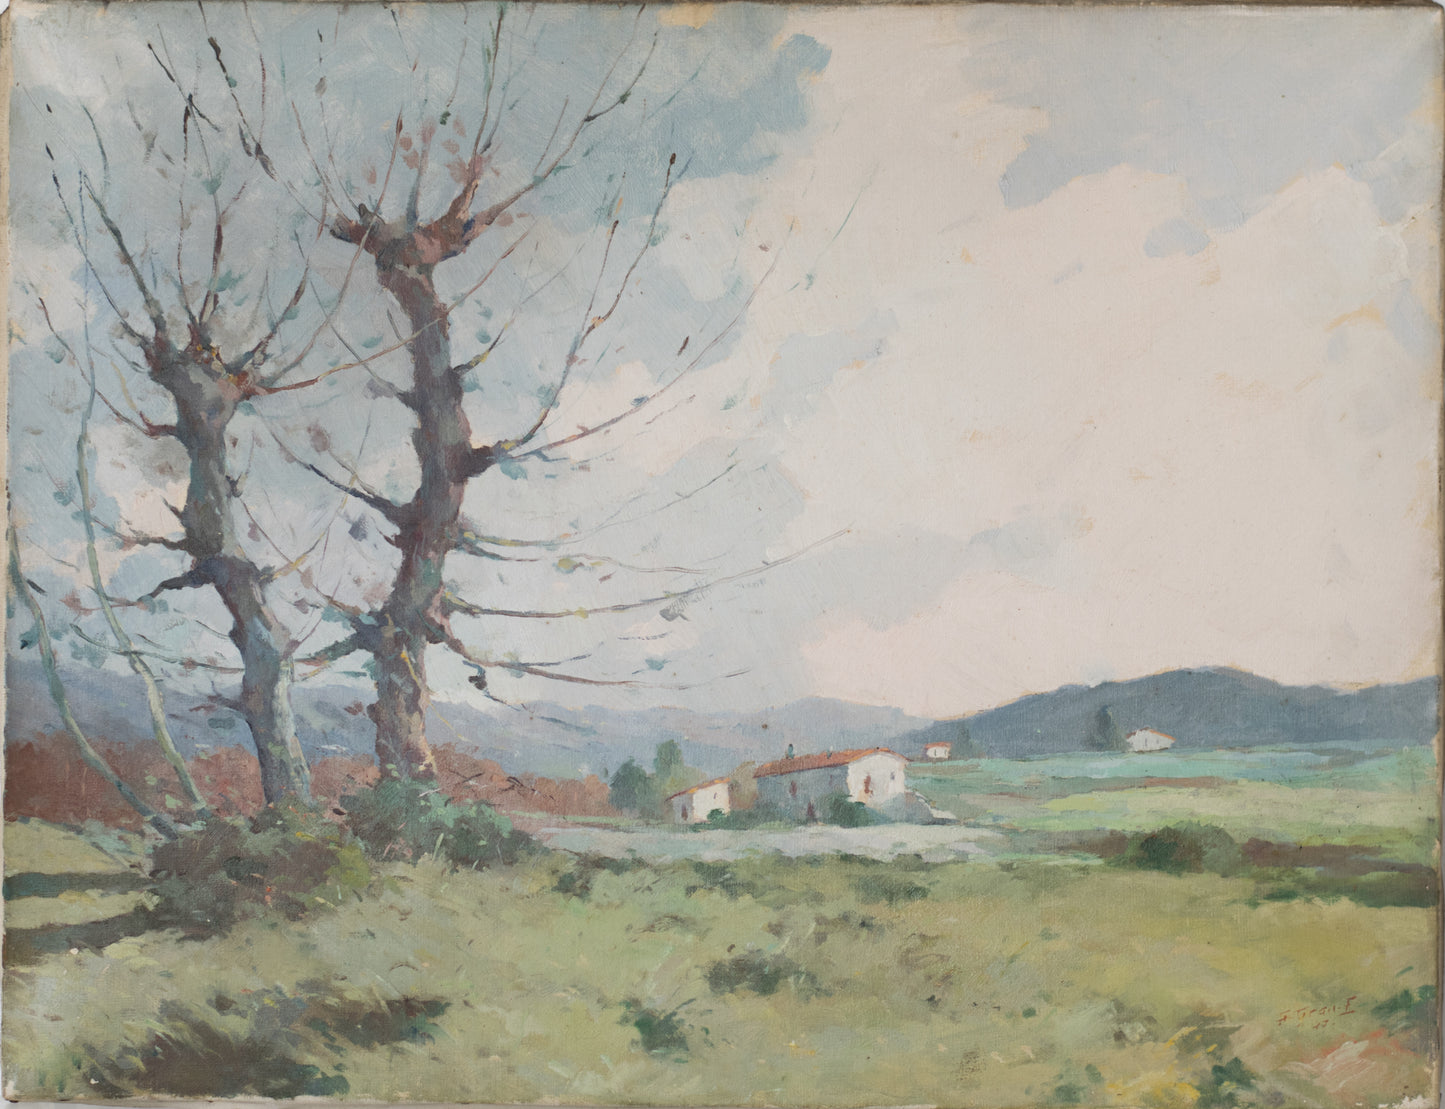 Landscape with a view of trees and mountains